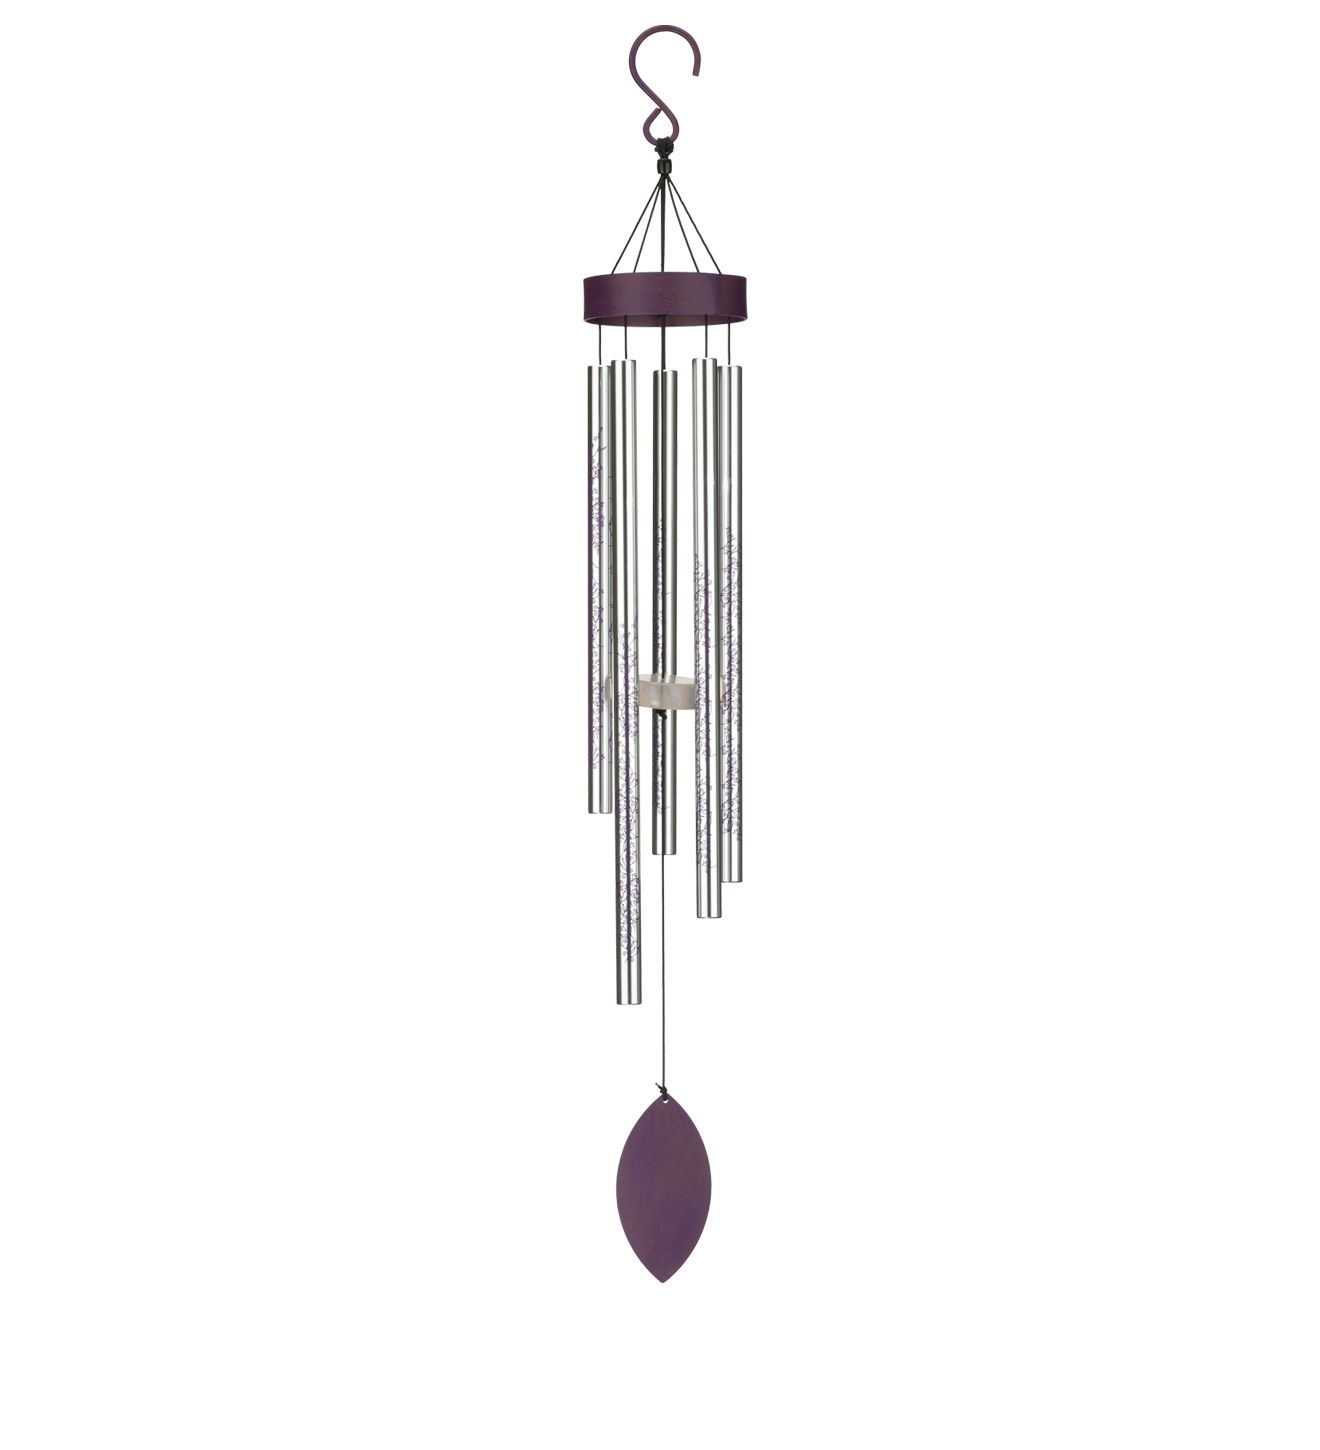 Floral Wind Chime